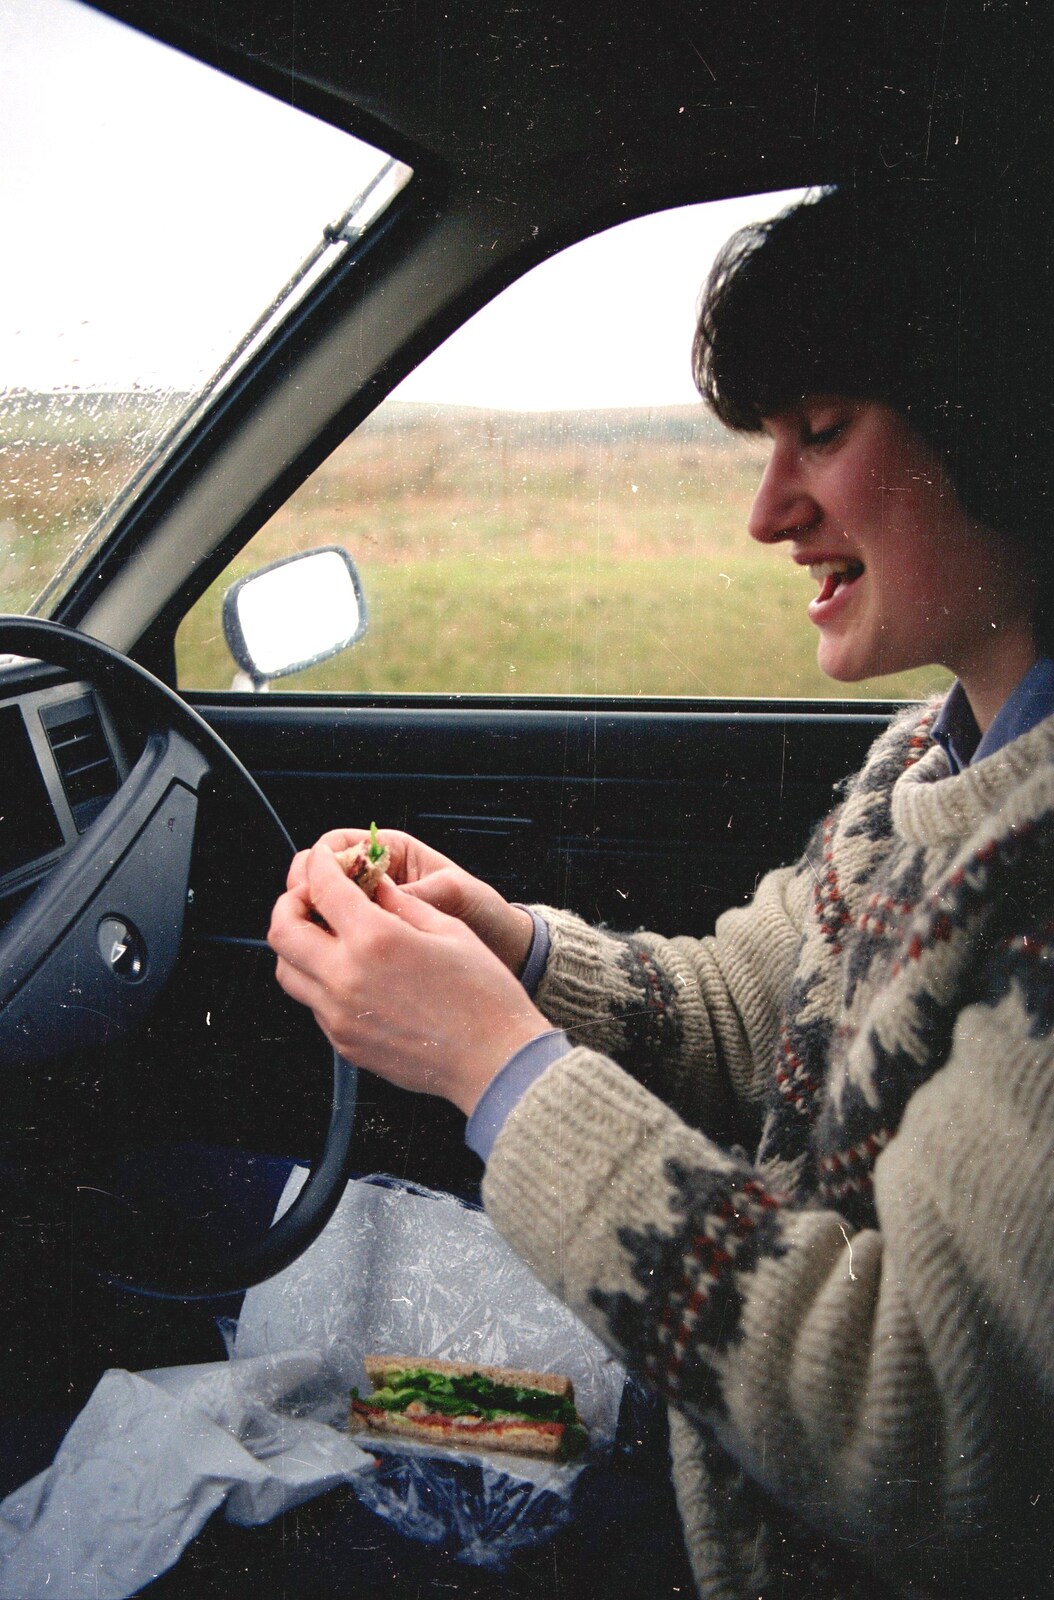 We have a car picnic in Angela's motor from Uni: Gus Honeybun and the Windy Gimli Burger, Plymouth - 17th October 1988